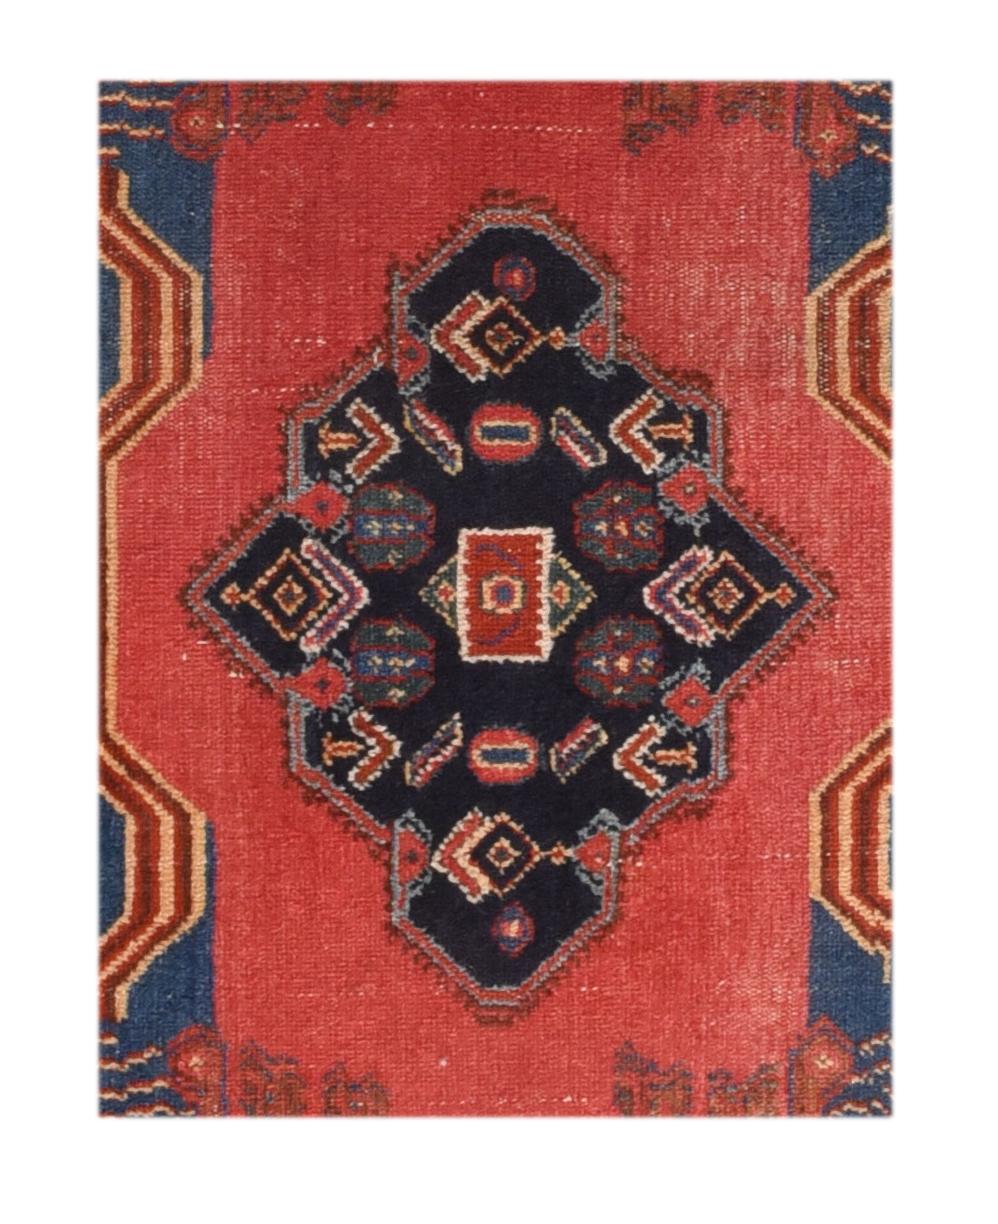 Fine antique Senneh Persian Kurd rug, hand knotted, circa 1910

Design: Tribal

Senneh rug, Senneh also spelled Senna or Sehna, handwoven floor covering made by Kurds who live in or around the town of Senneh (now more properly Sanandaj) in